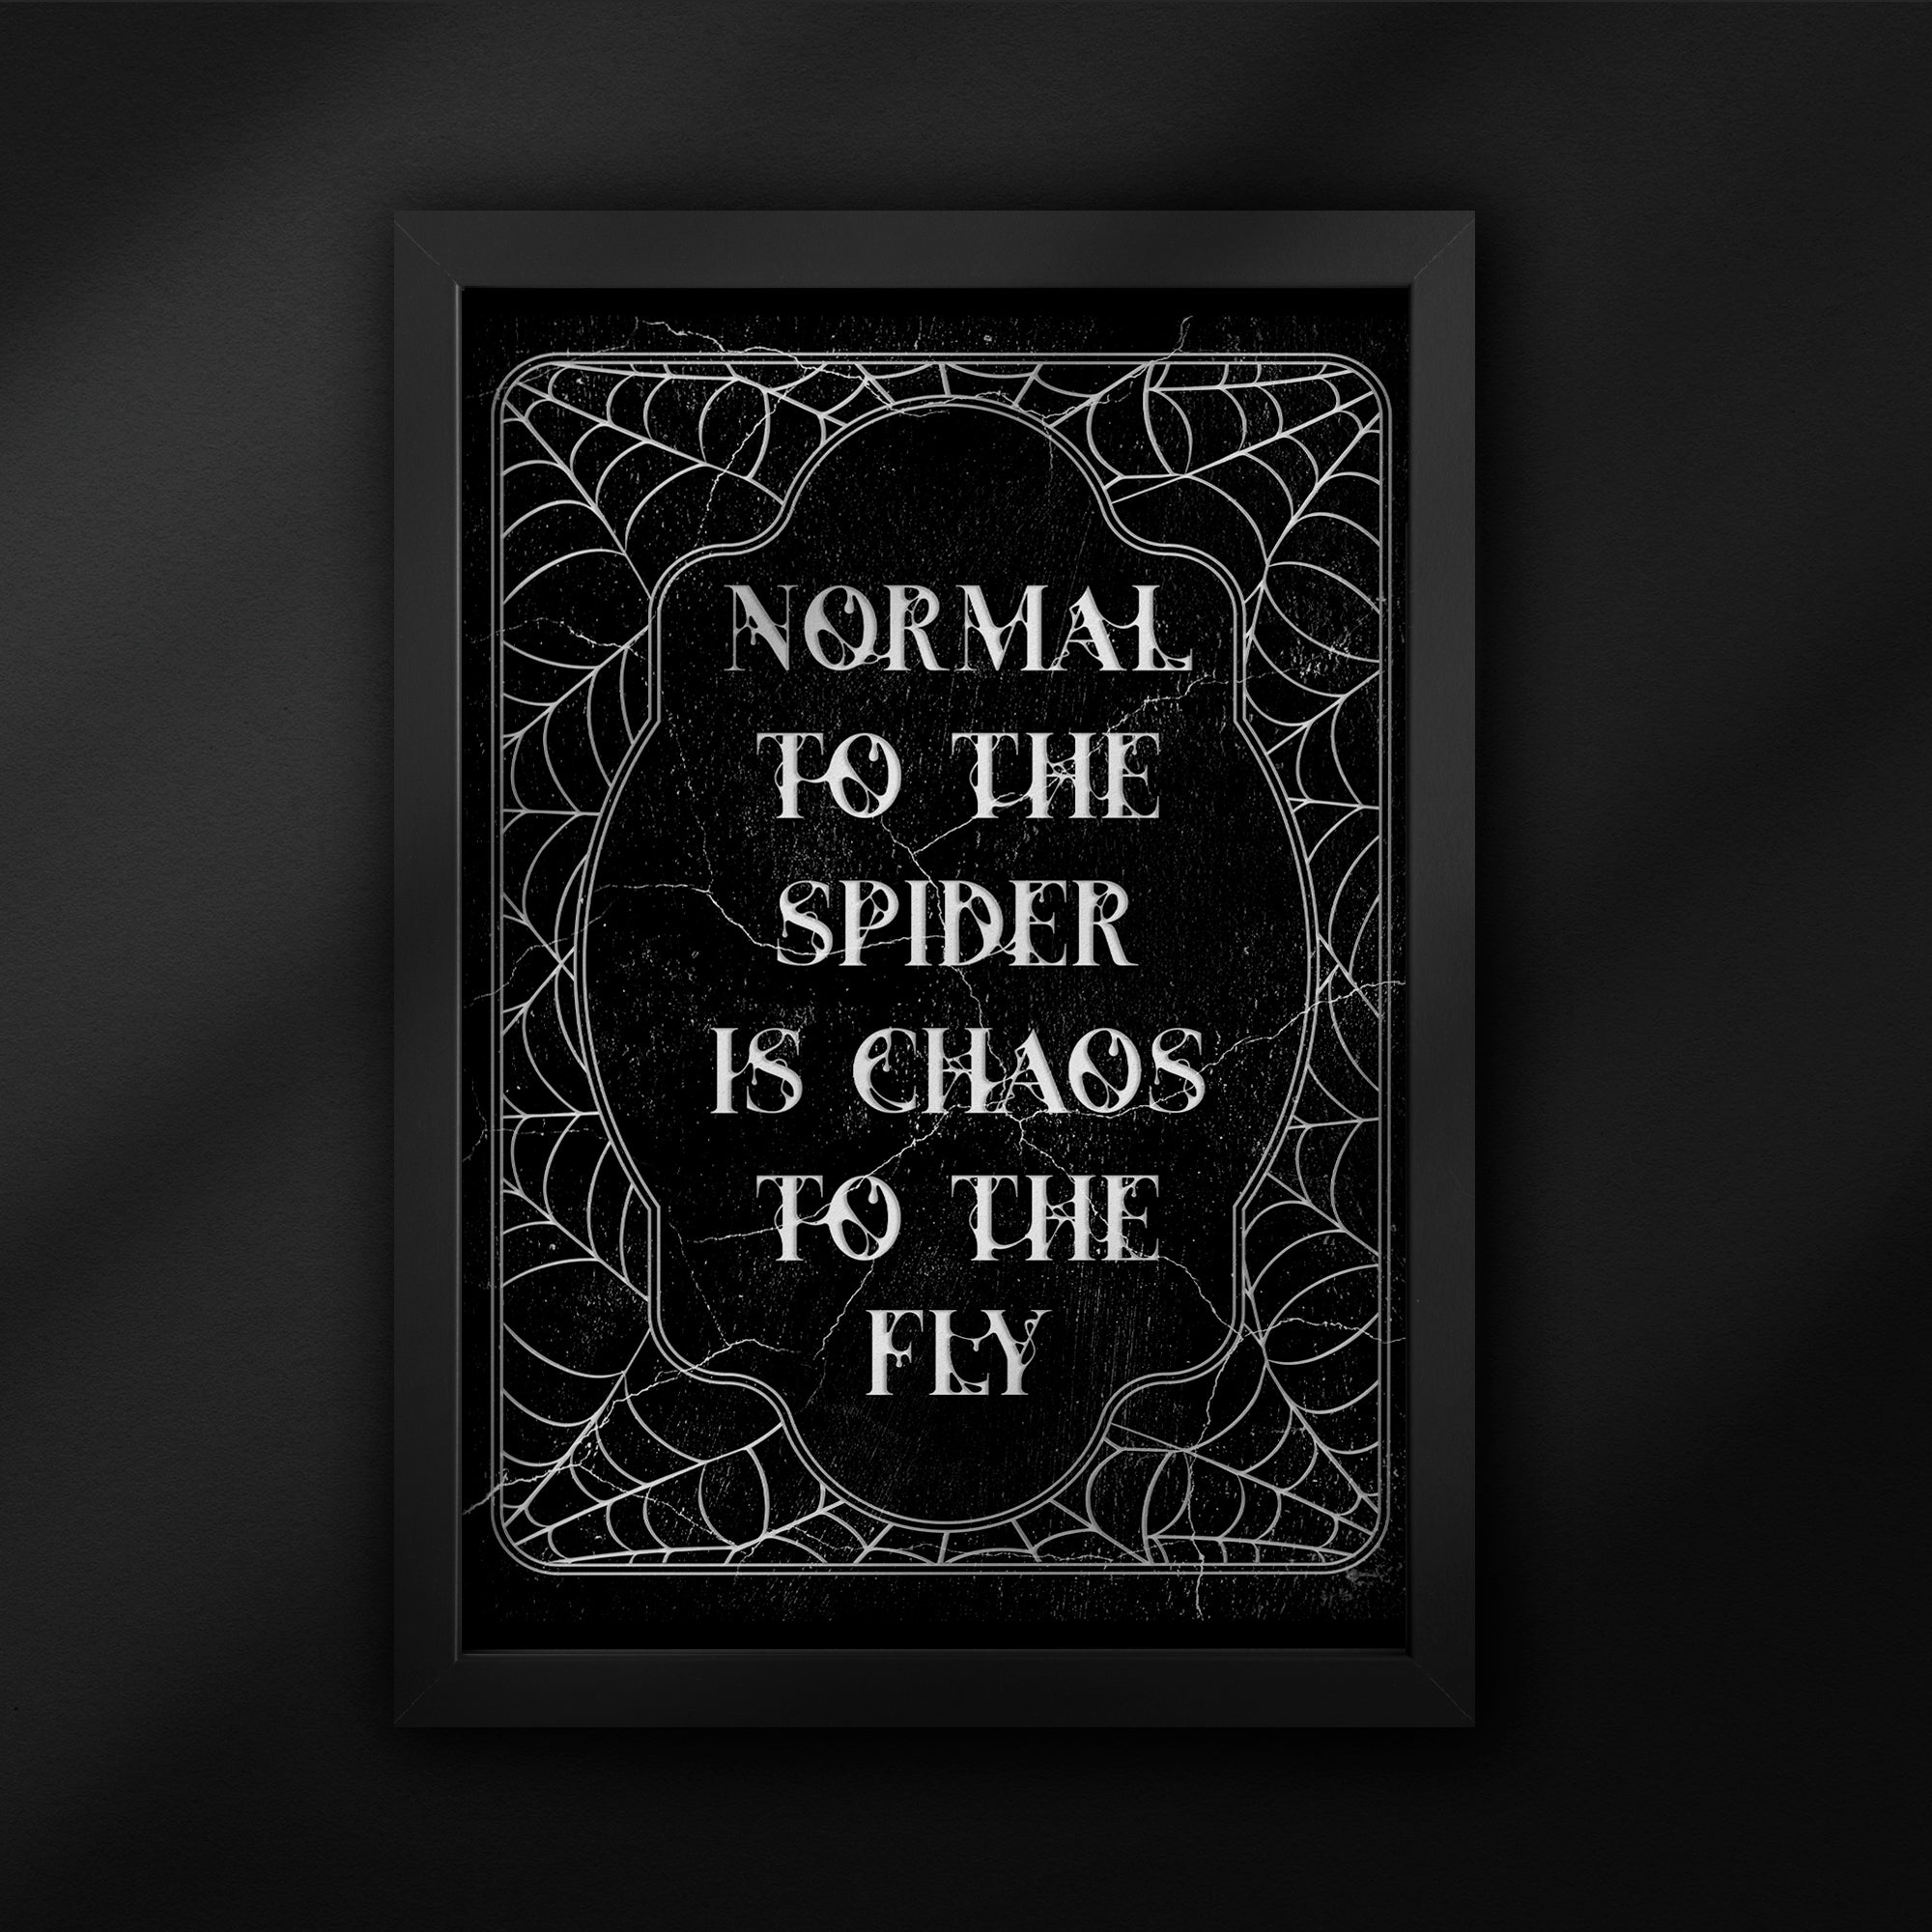 Normal to spider wall art - The Blackened teeth - Gothic decor